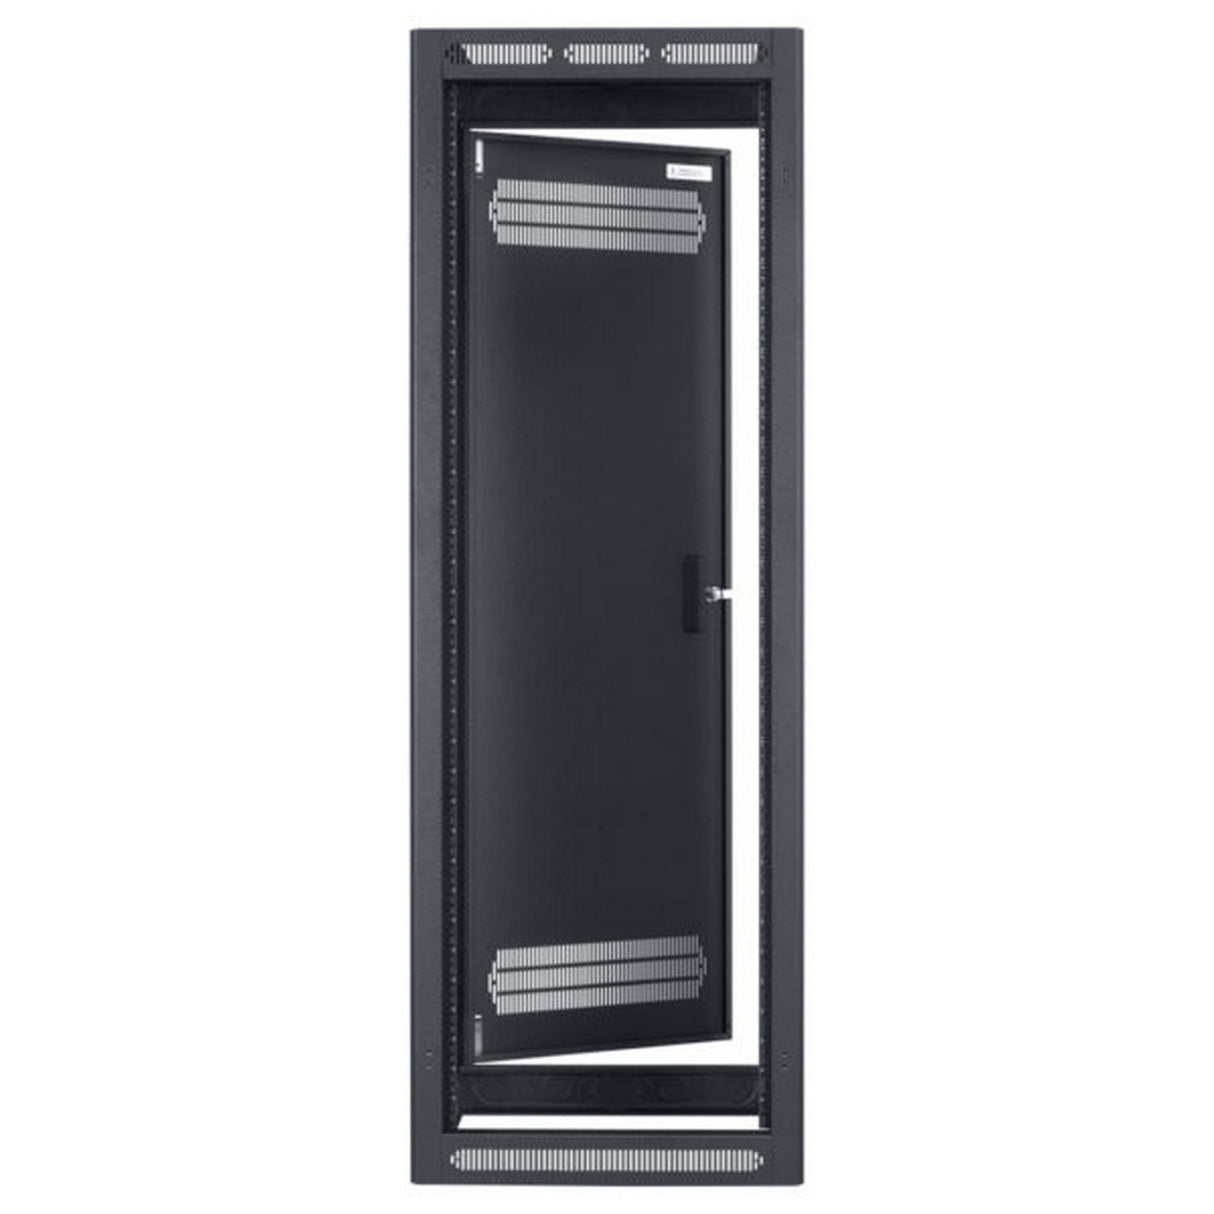 Lowell LER-3527 Enclosed Rack with Rear Door, 35 x 27 Inch